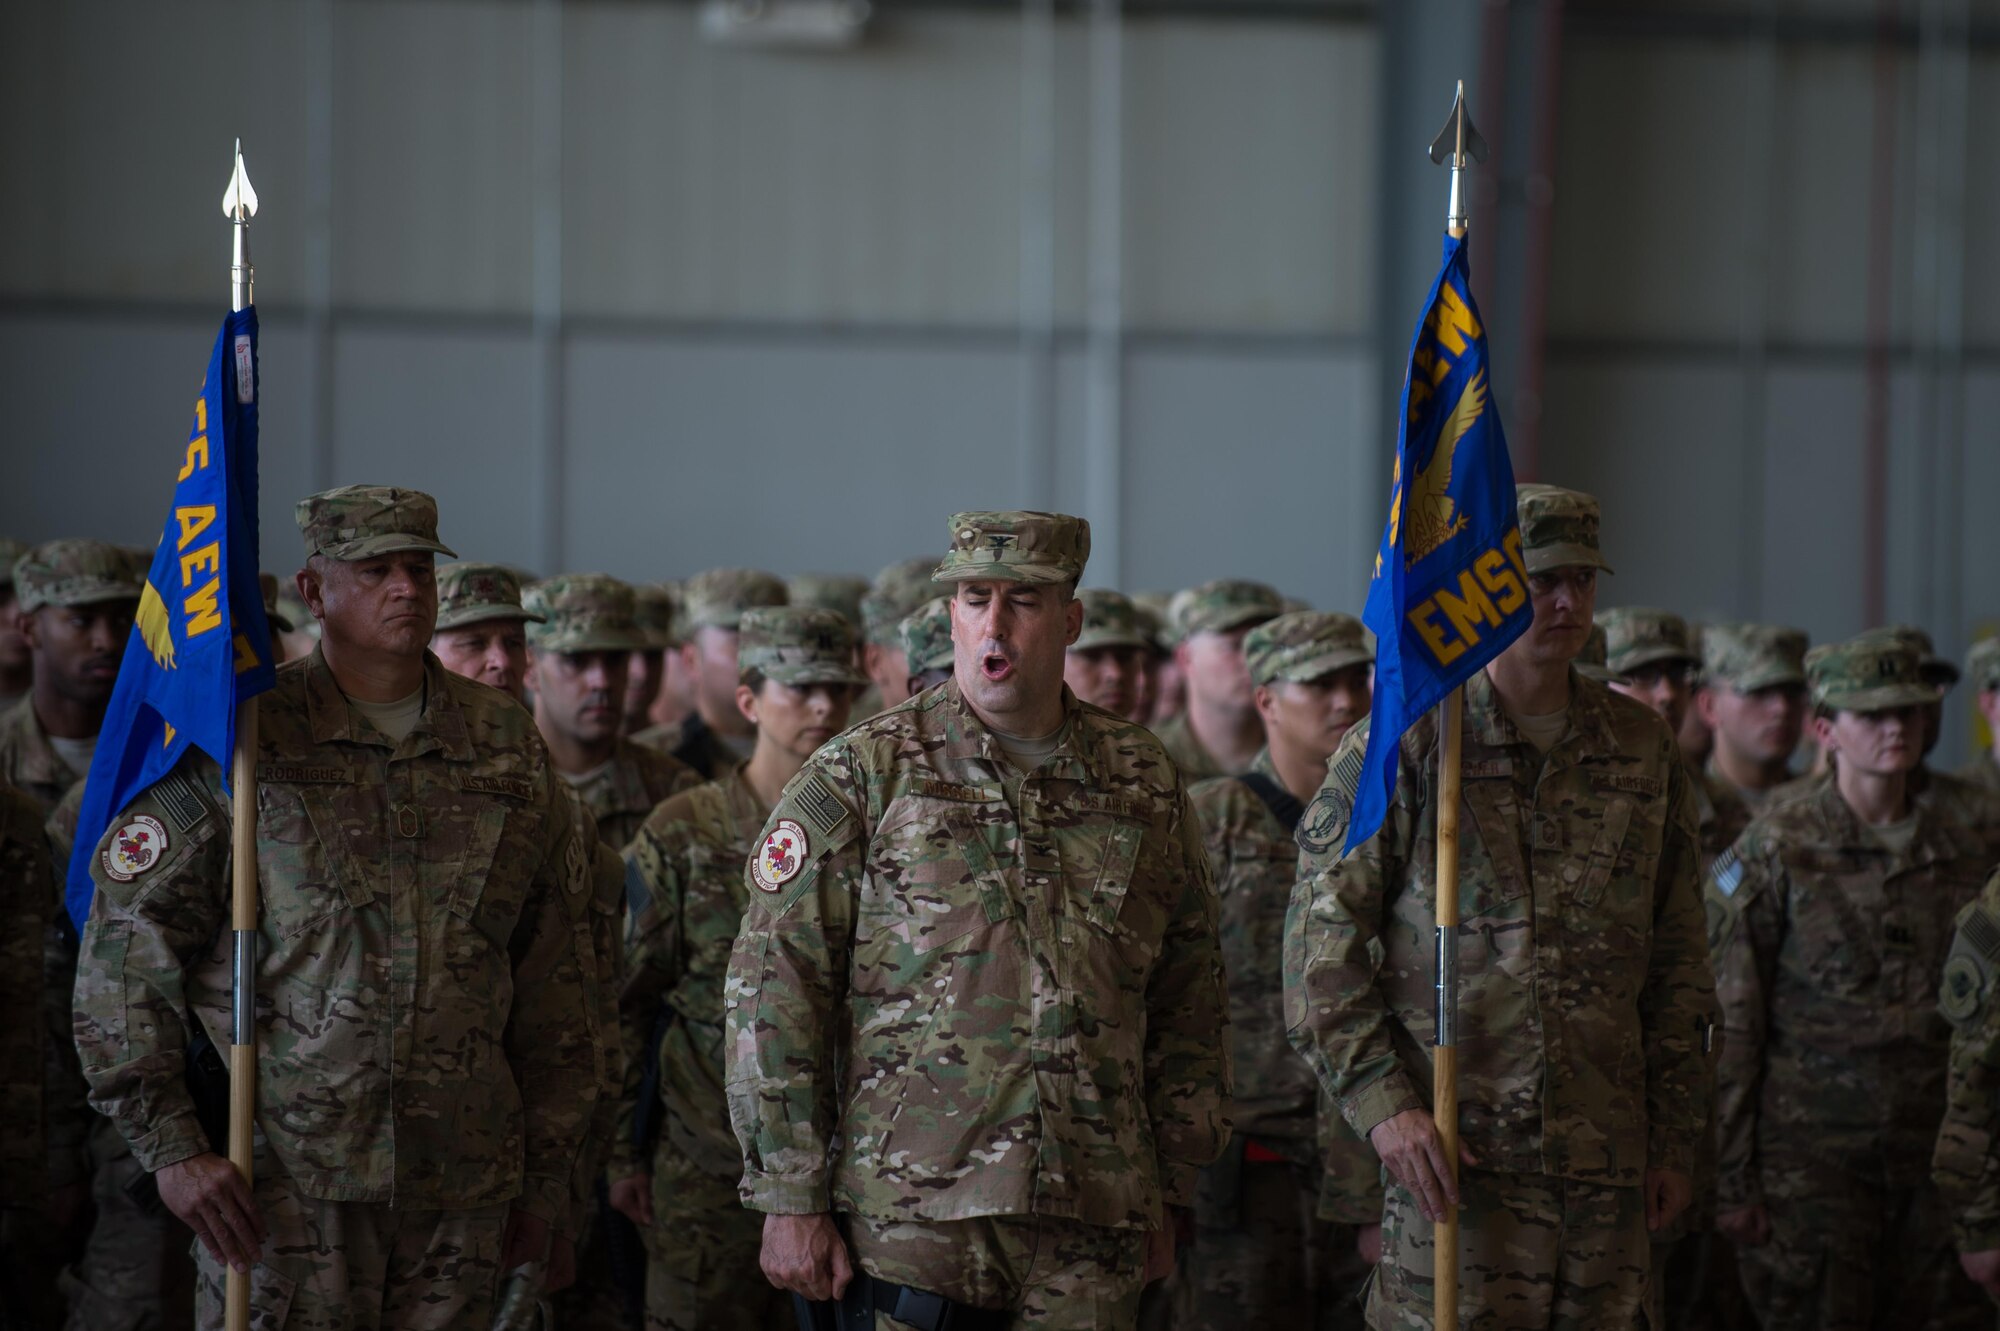 U.S. Air Force Col. Jeffrey Russell, 455th Expeditionary Maintenance Group commander, gives a command to 455th EMXG Airmen during the 455th Air Expeditionary Wing change of command ceremony July 1, 2015, at Bagram Airfield, Afghanistan. During the ceremony Brig. Gen. Dave Julazadeh took over command of the 455th AEW from Brig. Gen. Mark Kelly.  (U.S. Air Force photo by Tech. Sgt. Joseph Swafford/Released)